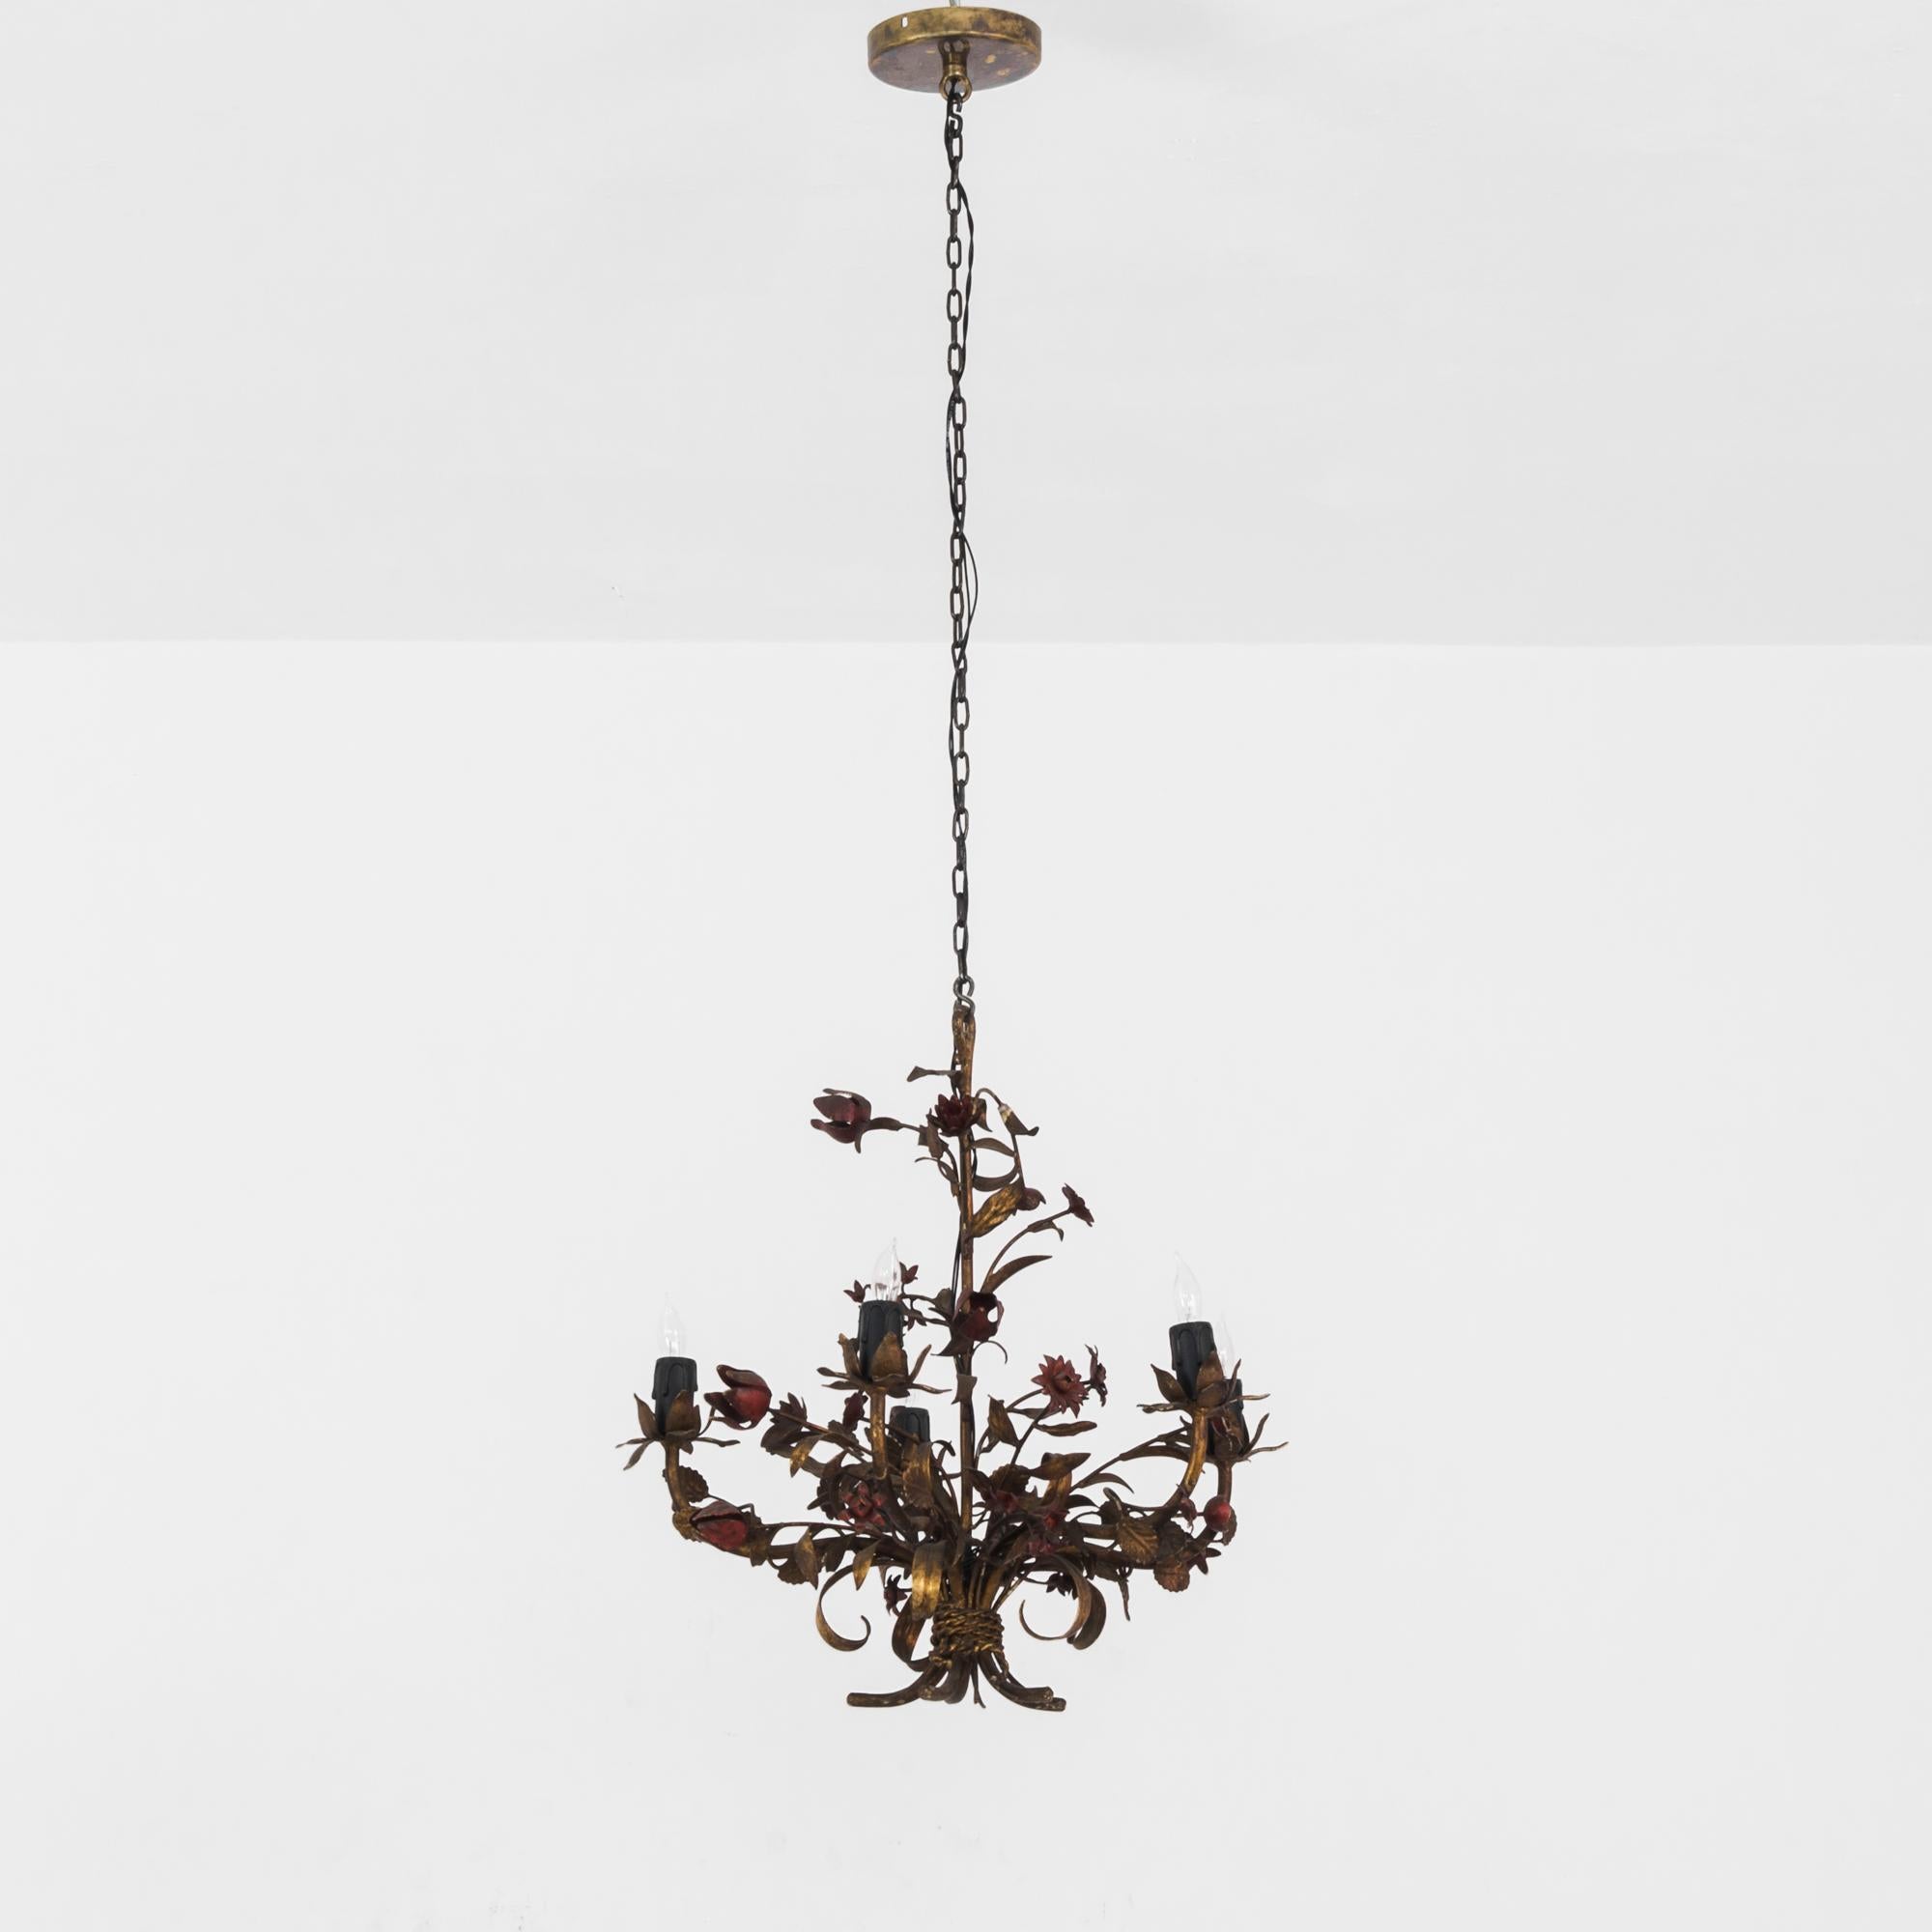 A metal chandelier from 1960s France. Unruly and romantic. Lifelike metal flowers and leaves — roses, daisies and anemones — tangle around four upraised arms bearing candle bulbs. The sconces are embellished with petals and sepals, framing the light